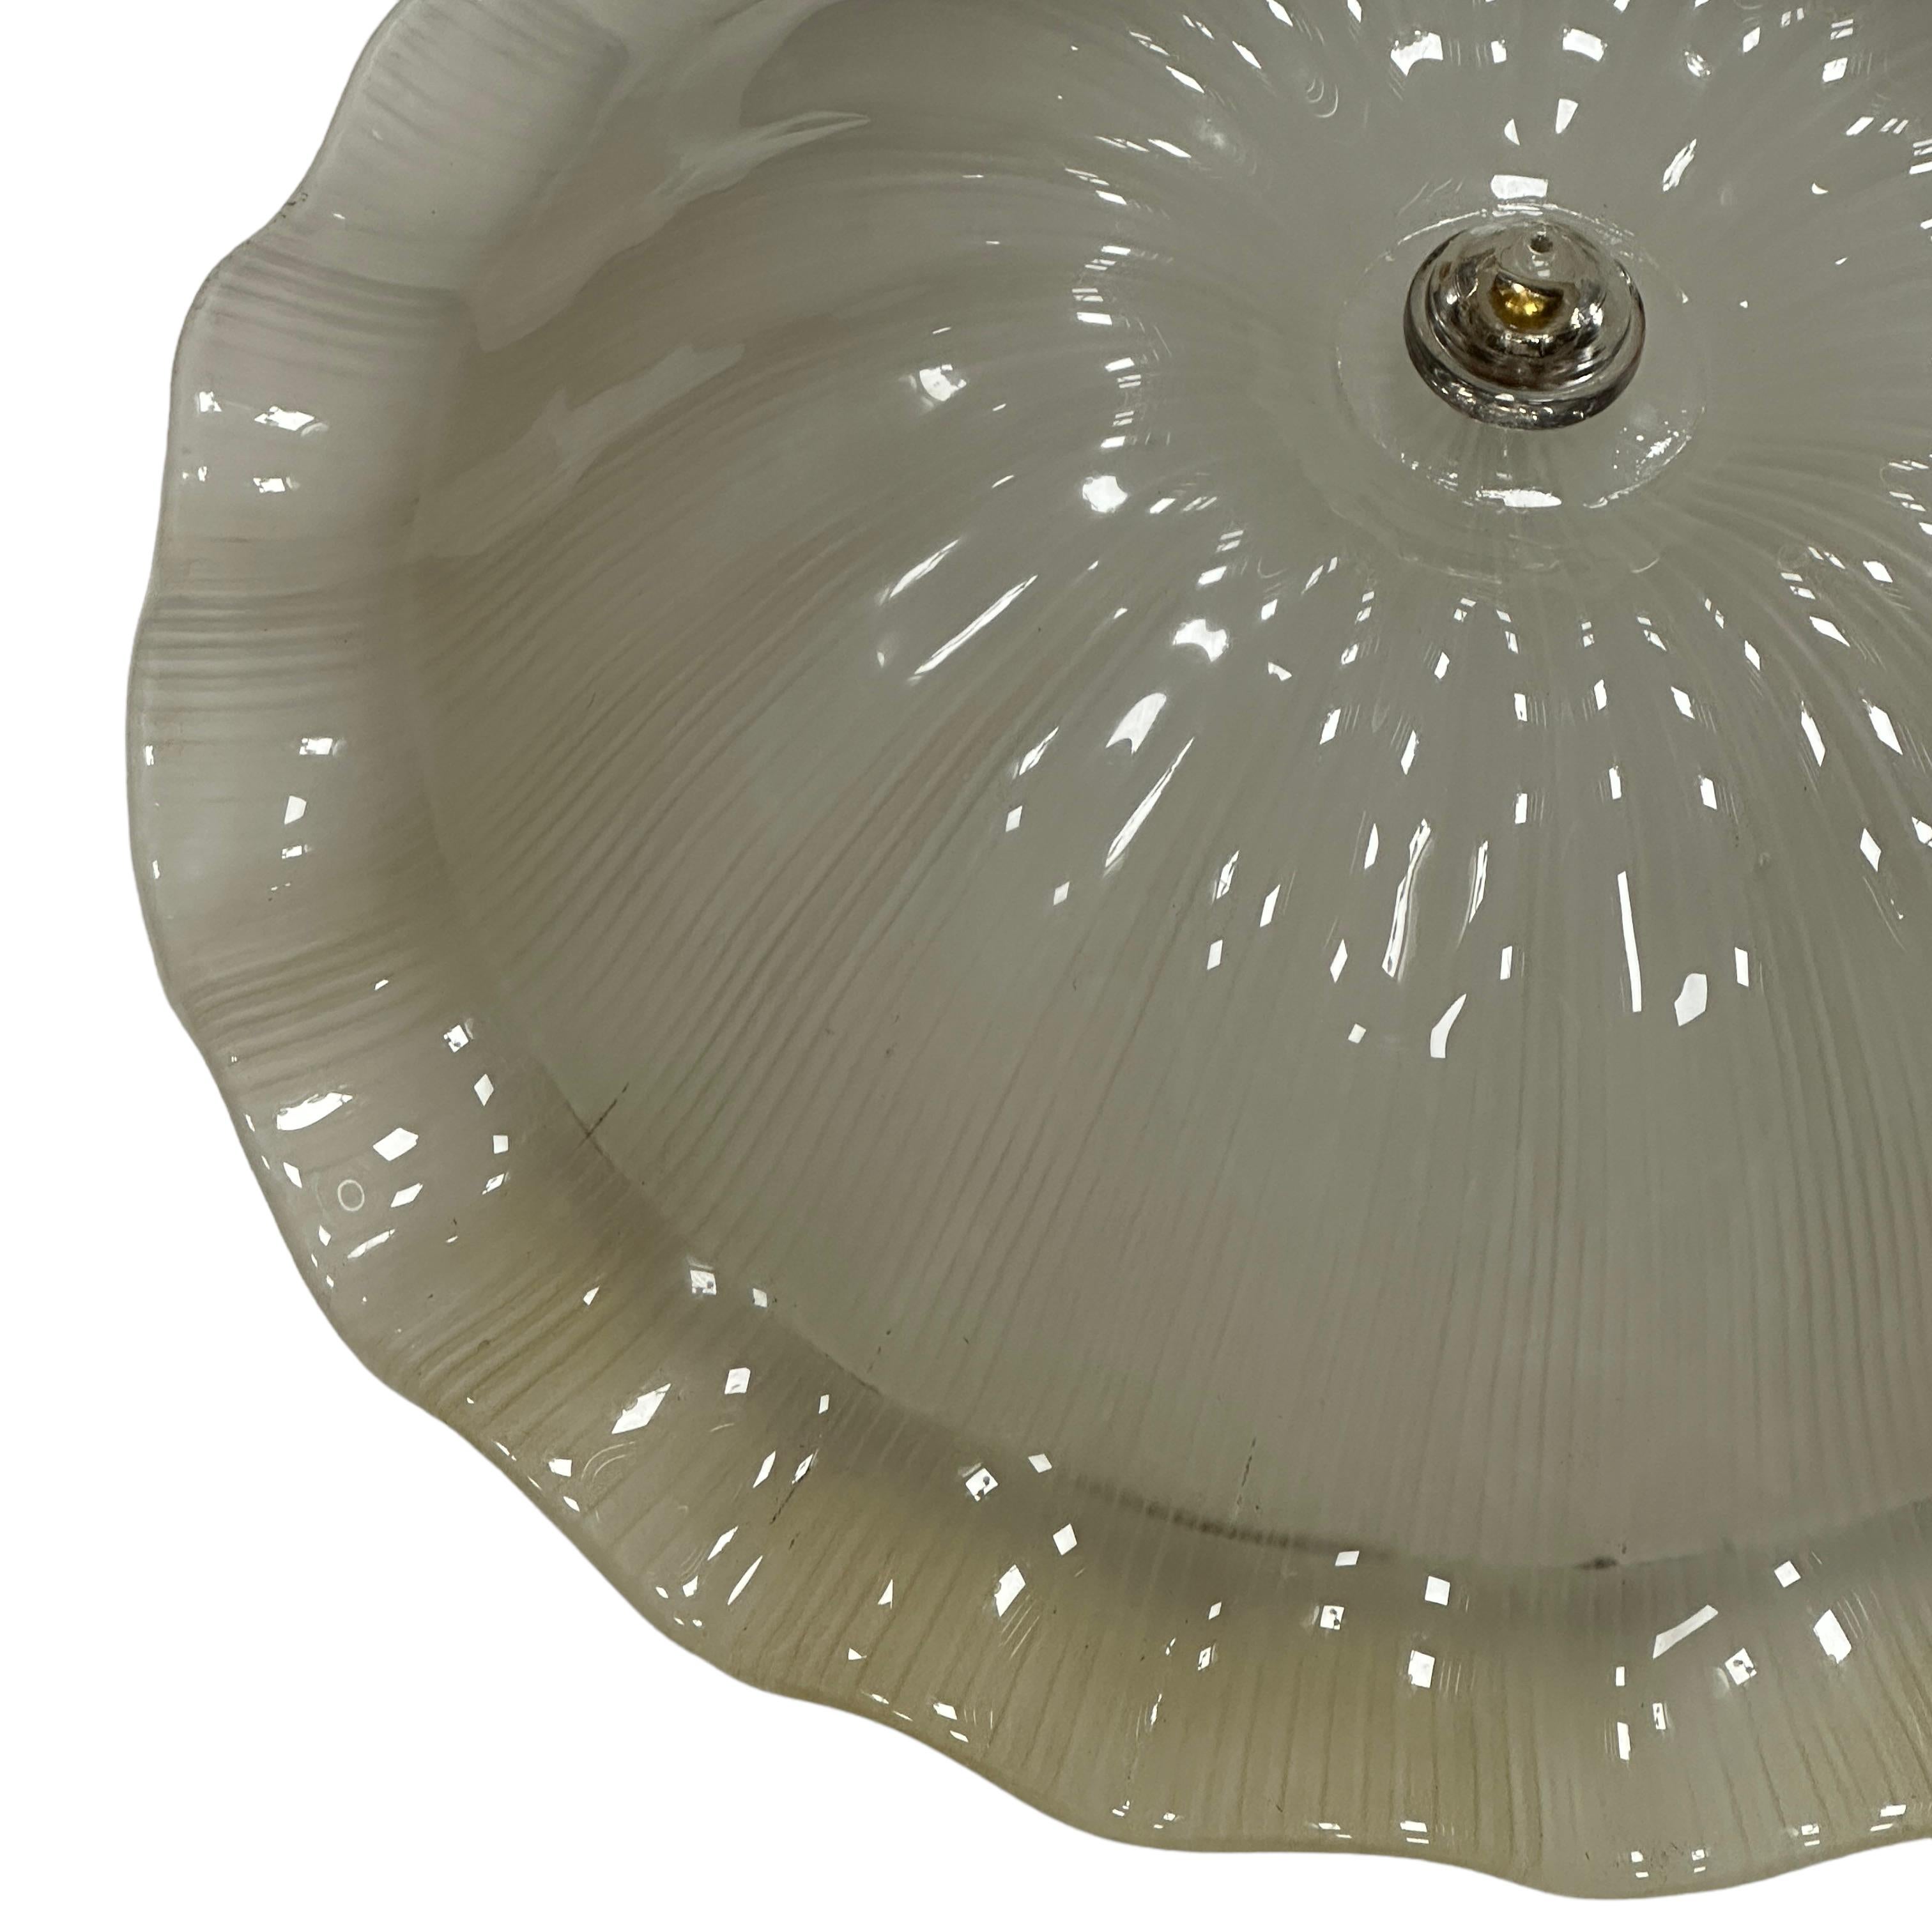 This exquisite flush mount chandelier in style of the legendary atelier of Venini in Italy, circa 1970s. It features a subtly concave and channeled hand blown thick and heavy Murano glass shade. With its clean modernist lines and timeless